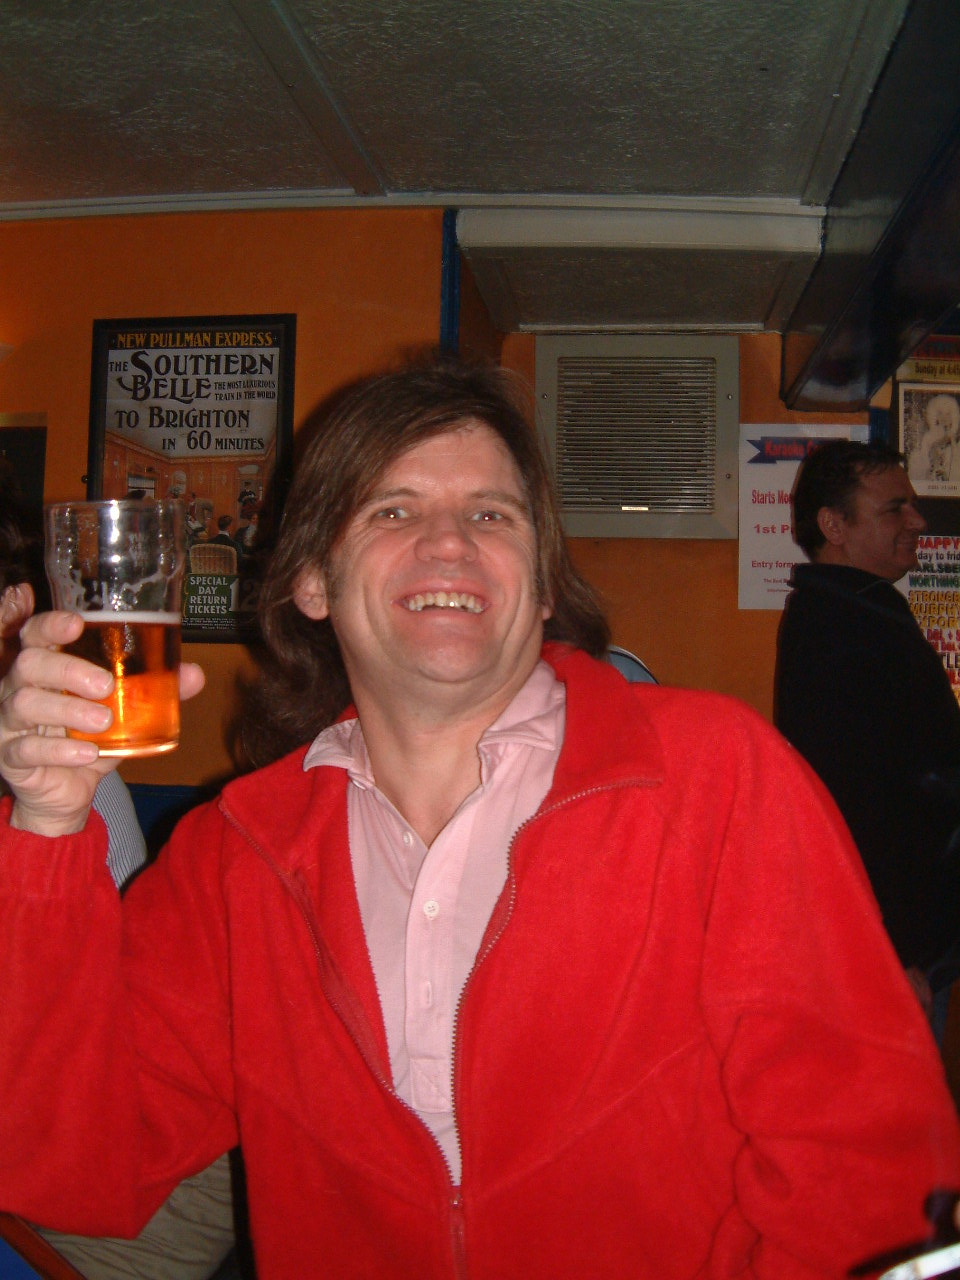 man drinking beer in a pub while posing for a po